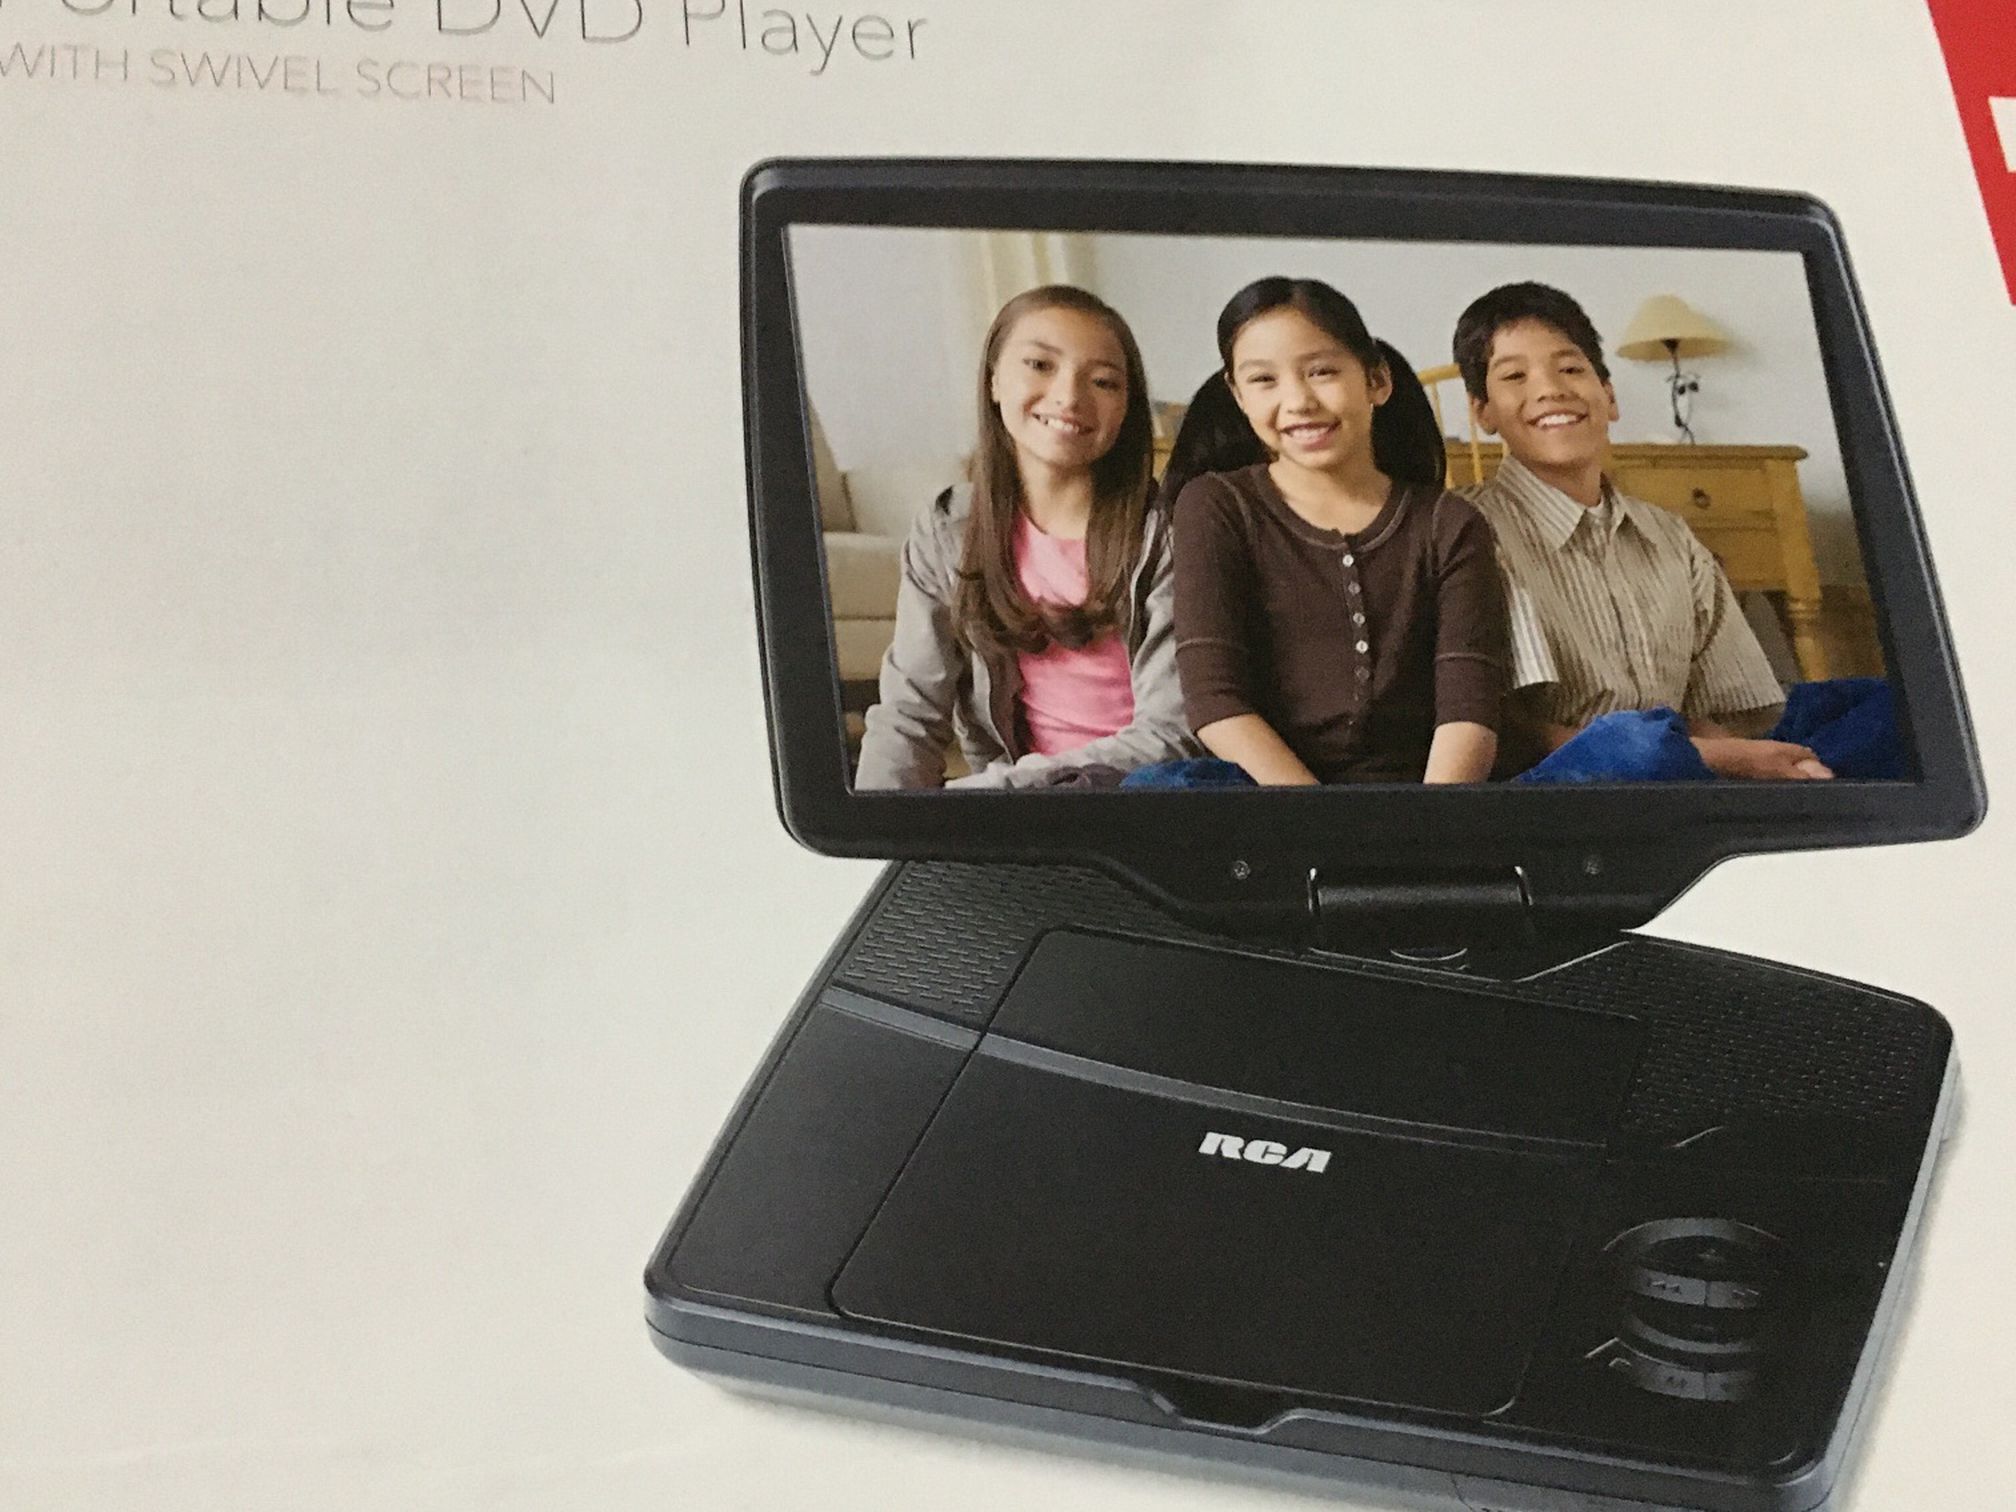 New Portable DVD player